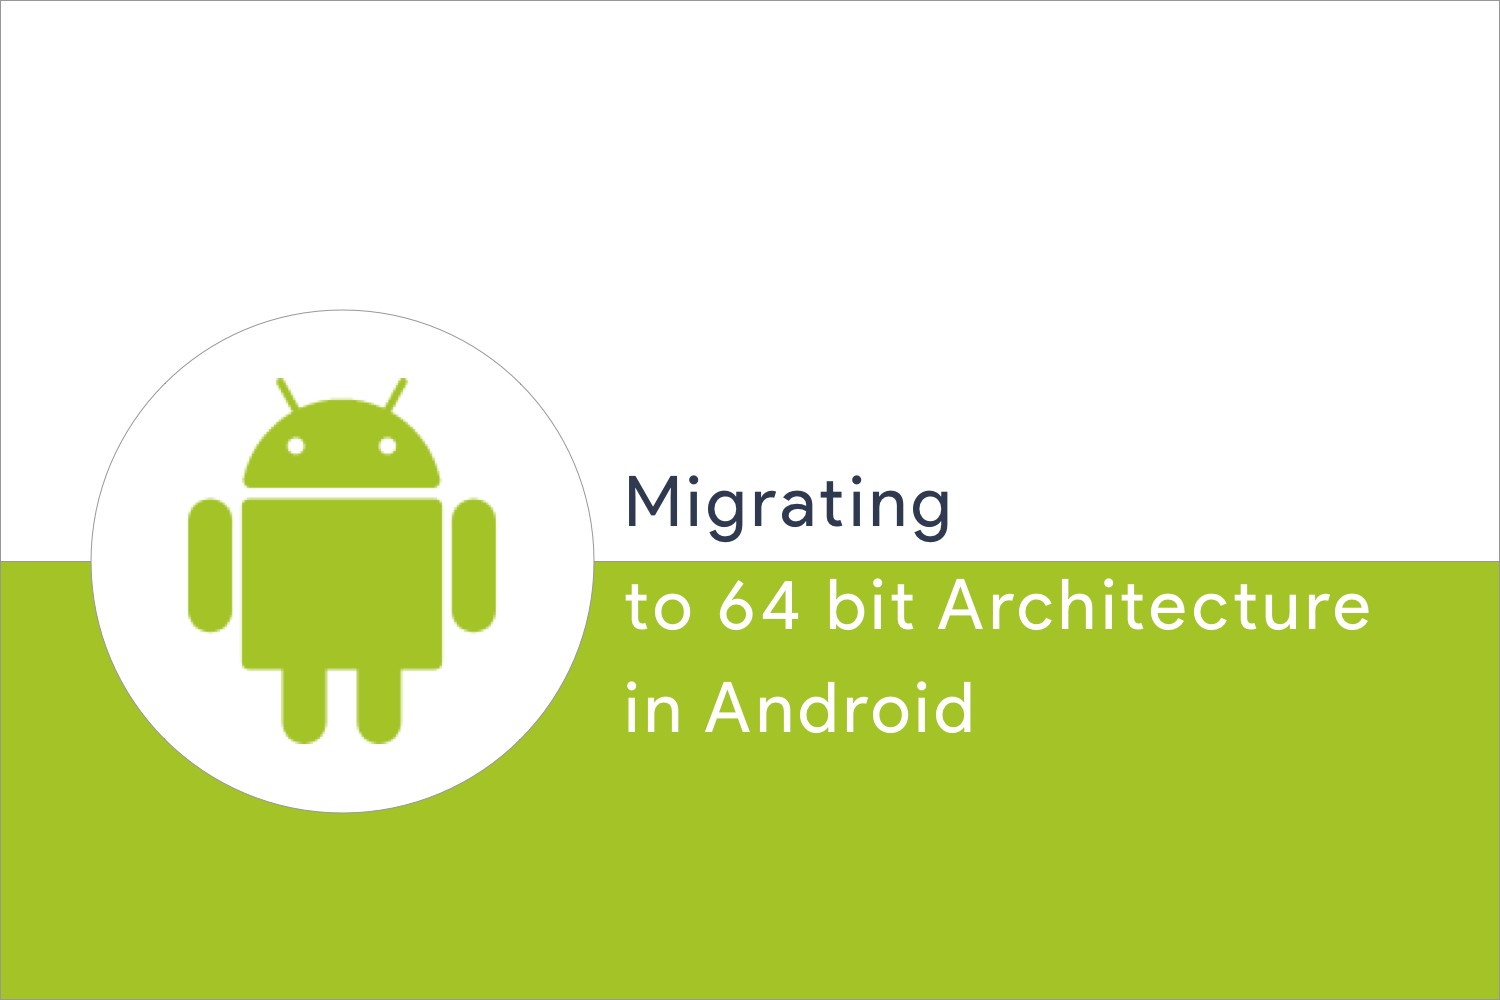 Migrating to 64 bit Architecture in Android